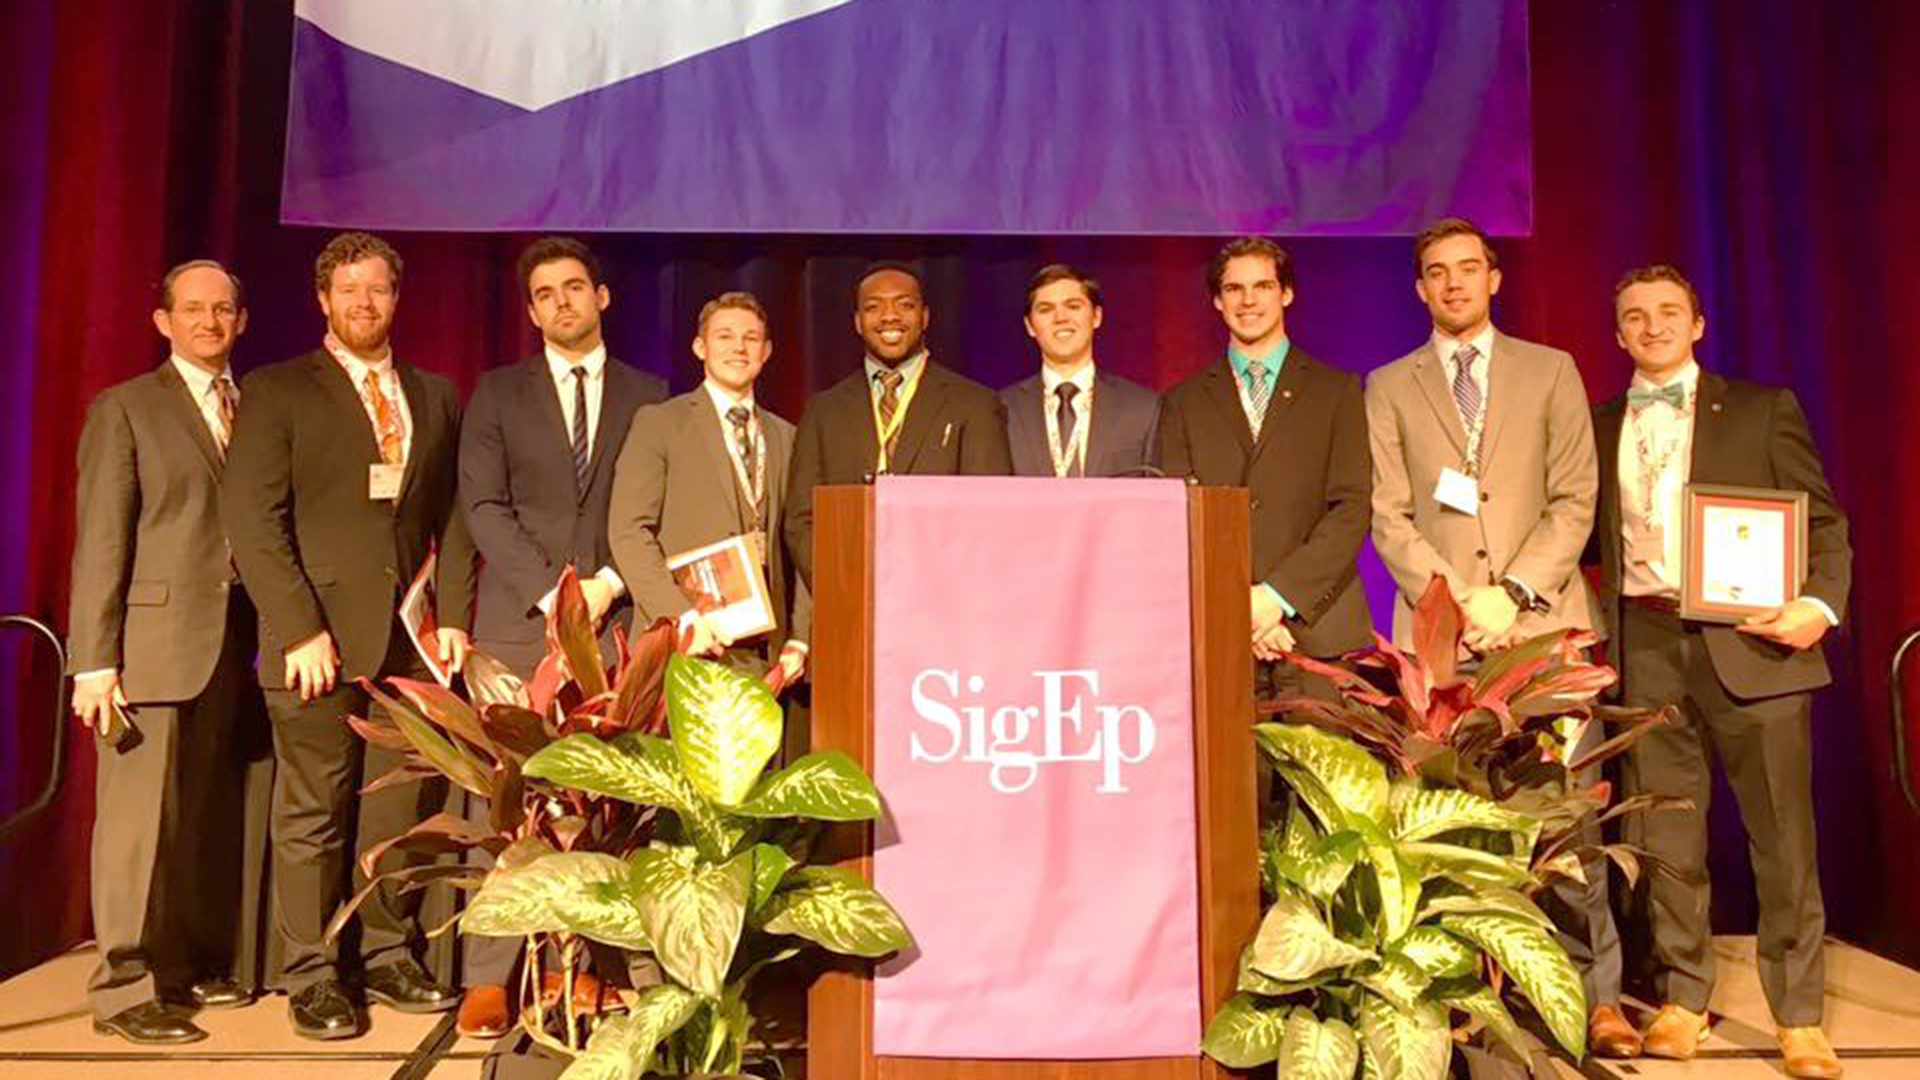 Sigma Phi Epsilon fraternity members standing on stage together after winning award